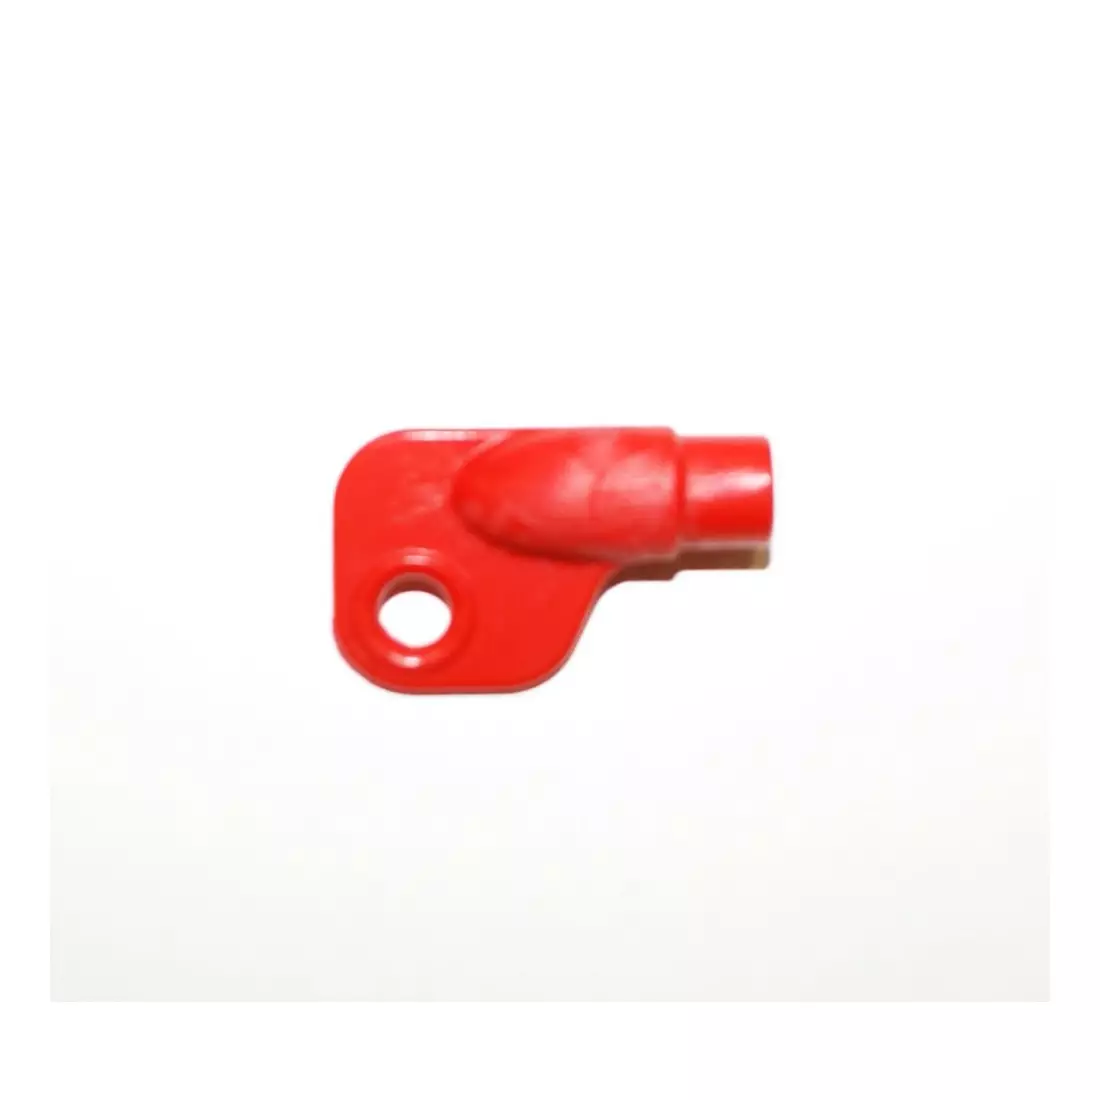 OKBABY key for opening the Blocco Safe cube red OKB-8476